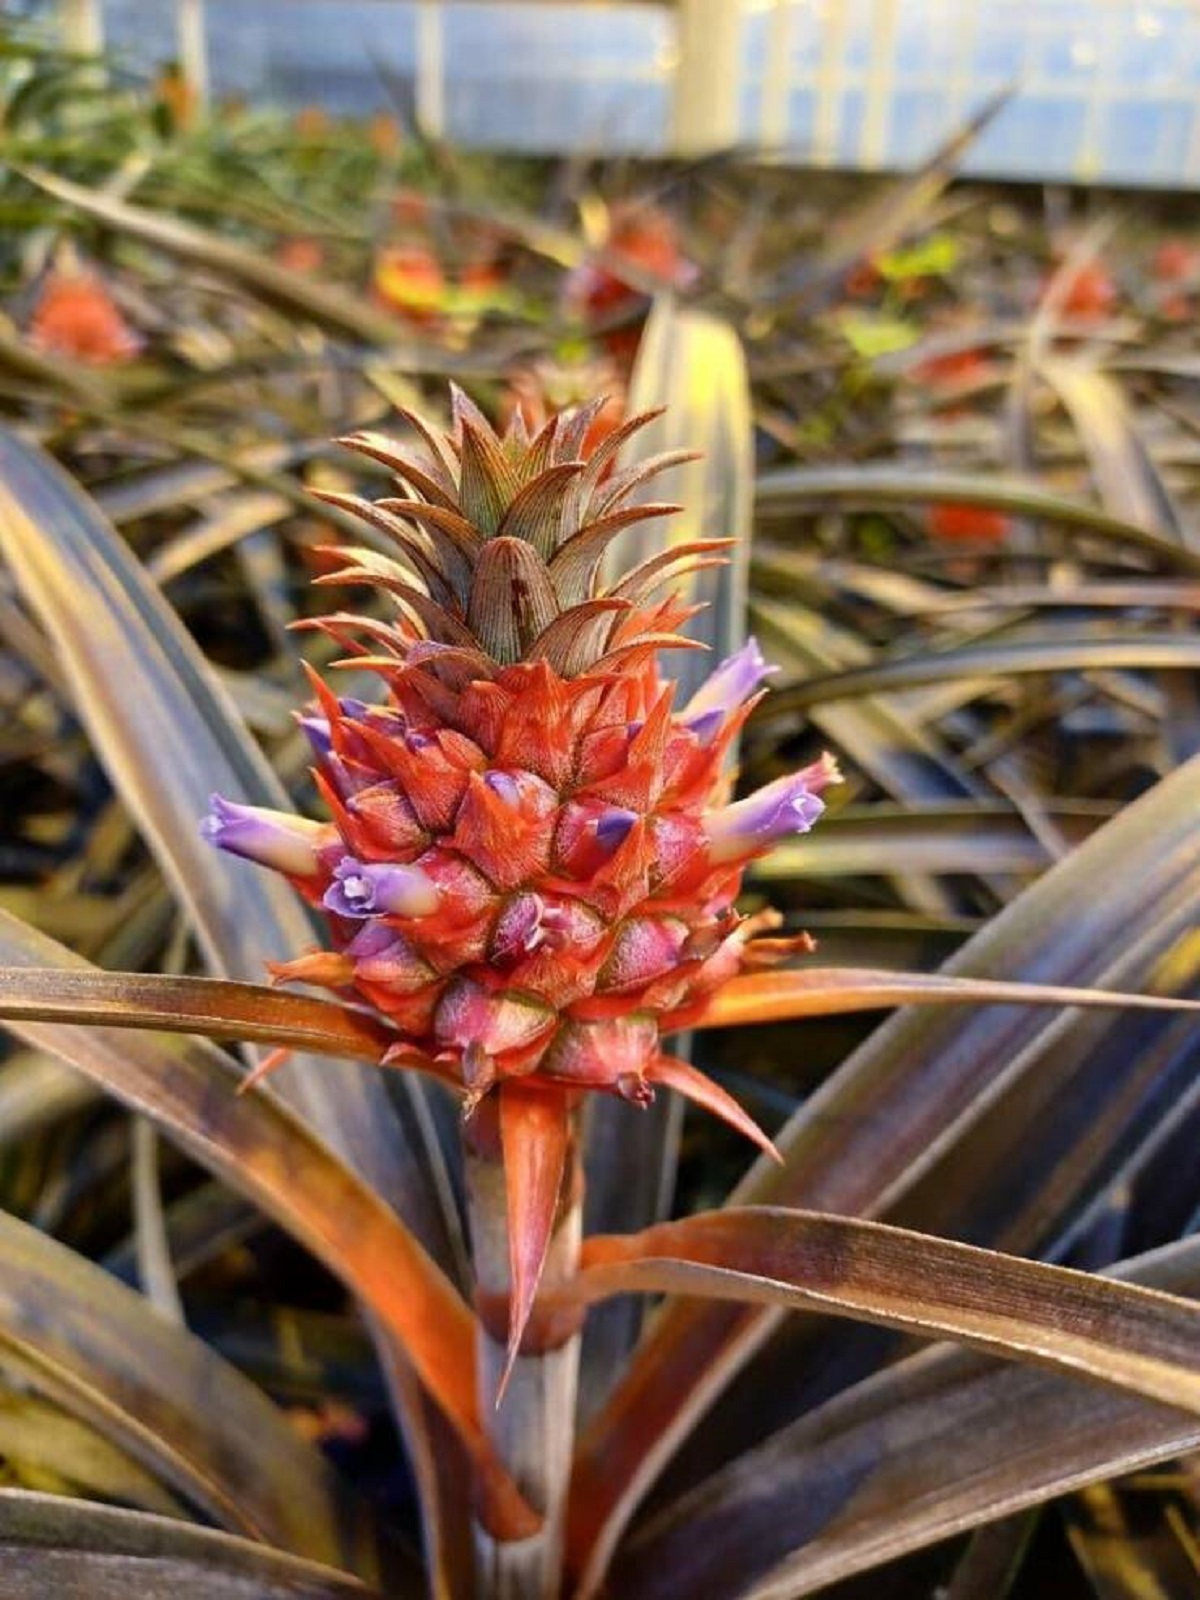 This is what a pineapple that has flowered looks like: